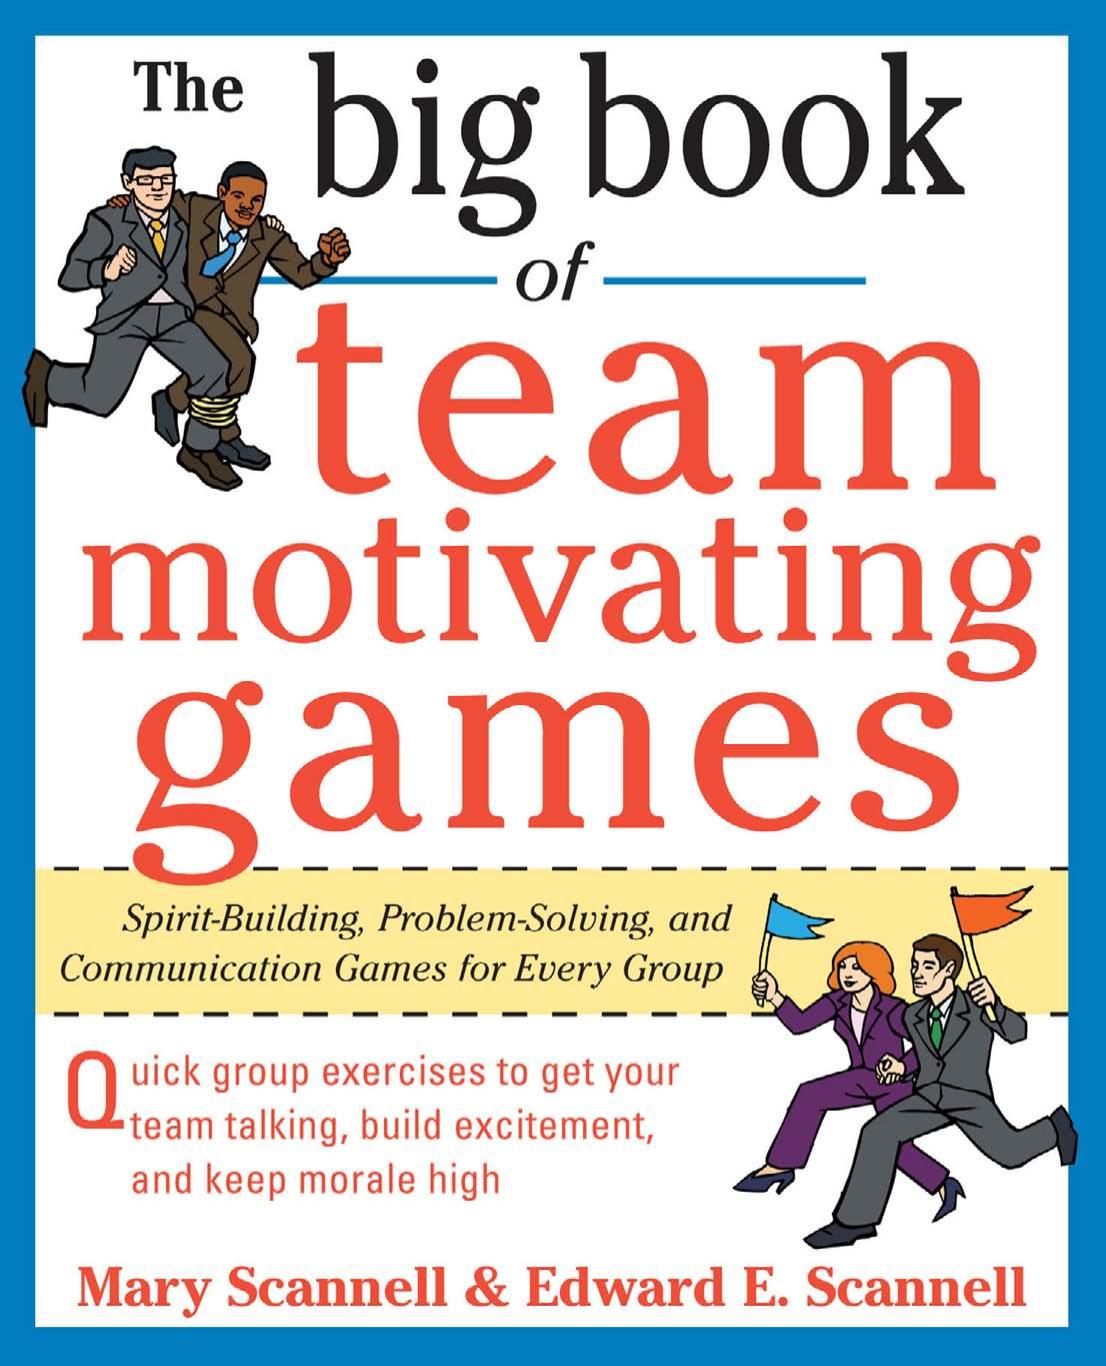 Mary Scannell, Edward Scannell The Big Book of Team-Motivating Games Spirit-Building, Problem-Solving and Communication Games for Every Group Big Book Series 2009